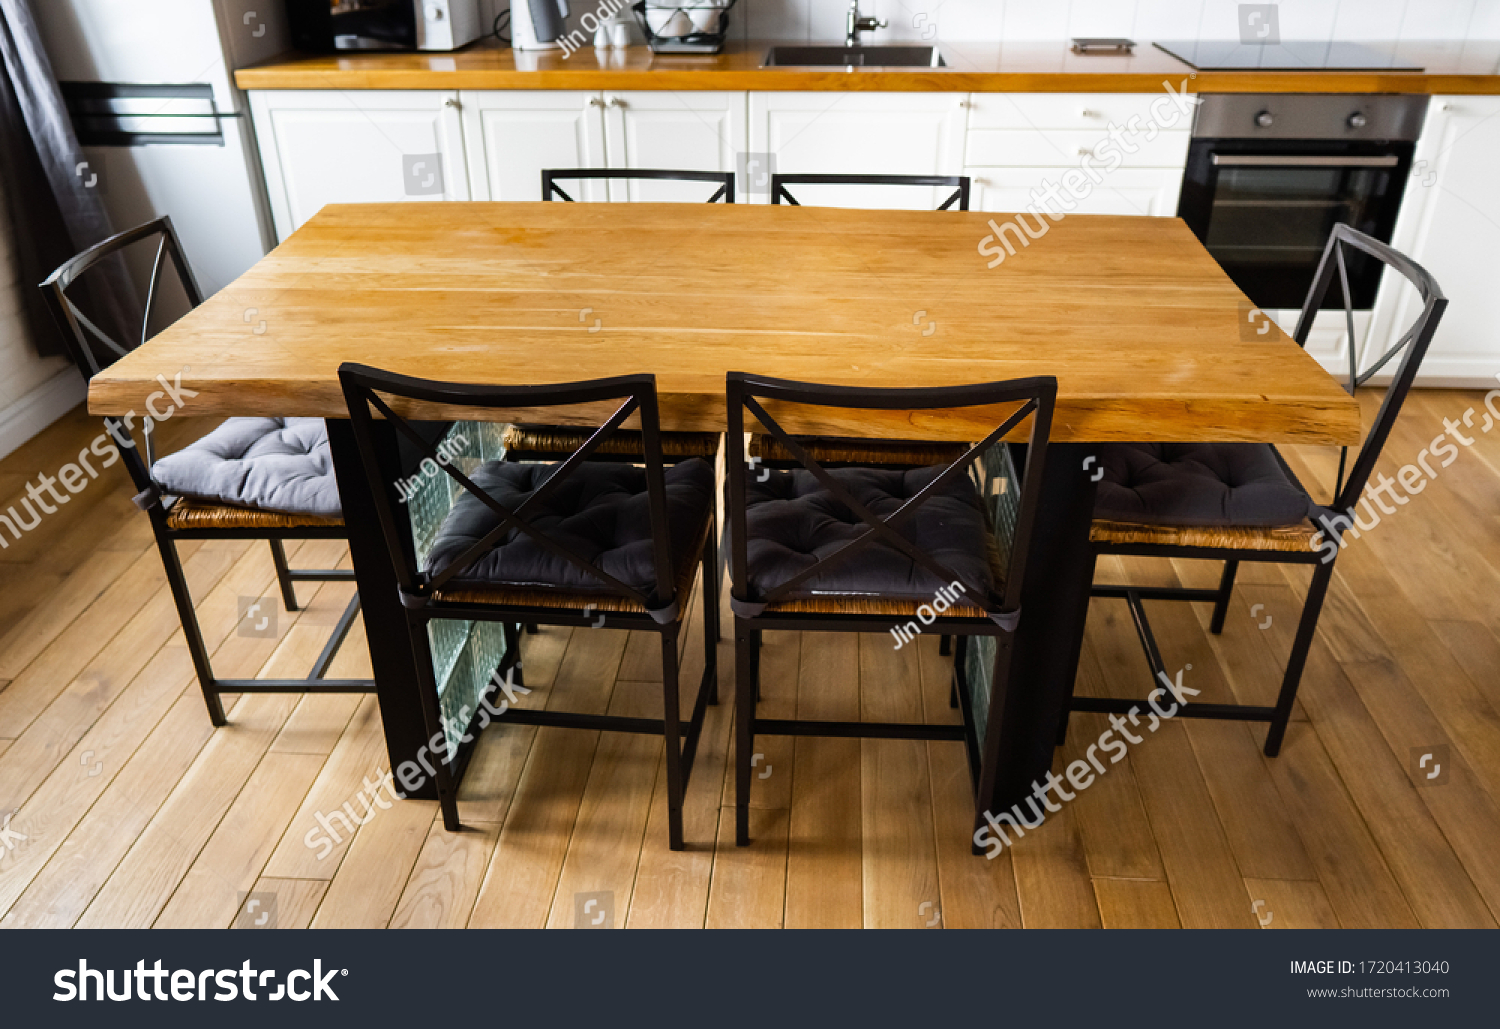 Stock Photo A Big Wooden Dining Table With Glass Blocks And Metal Wicker Chairs And Pillows In Modern 1720413040 